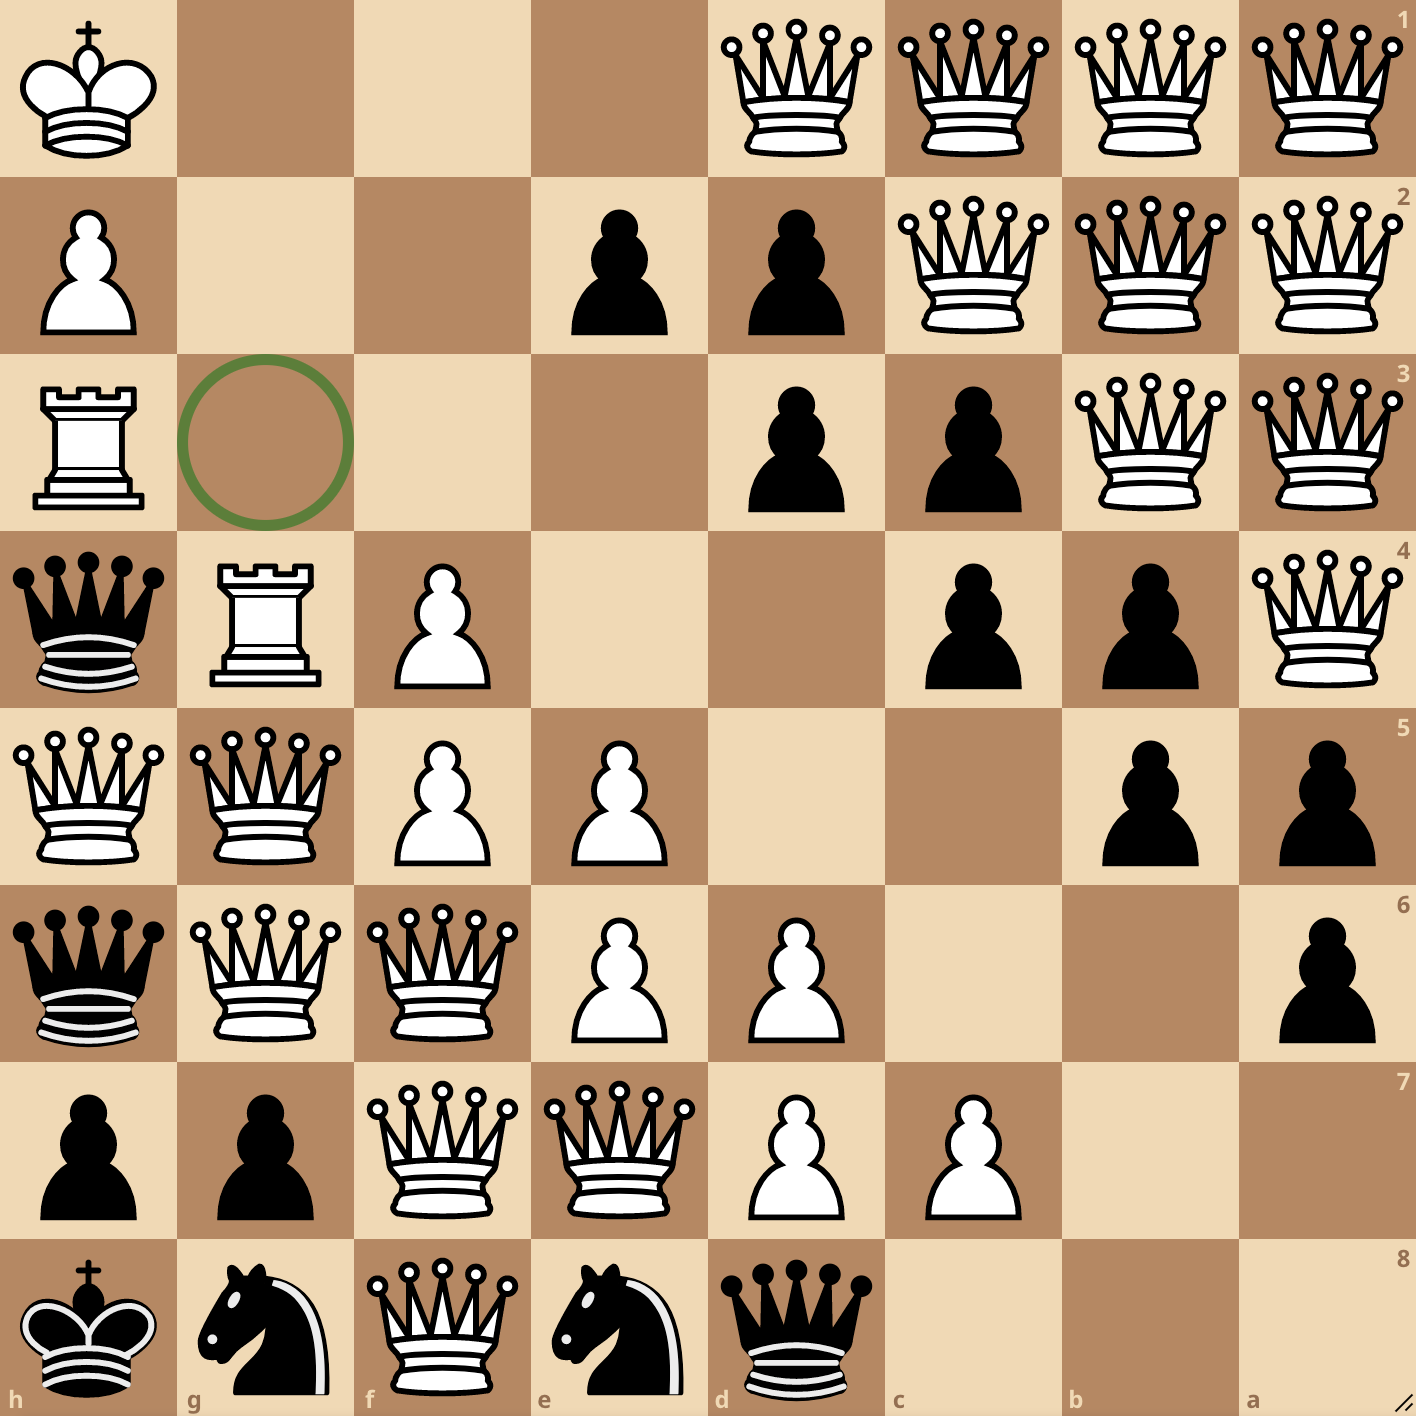 A chess board with a1 at the top right. A green circle marks g3. The board's FEN is below.